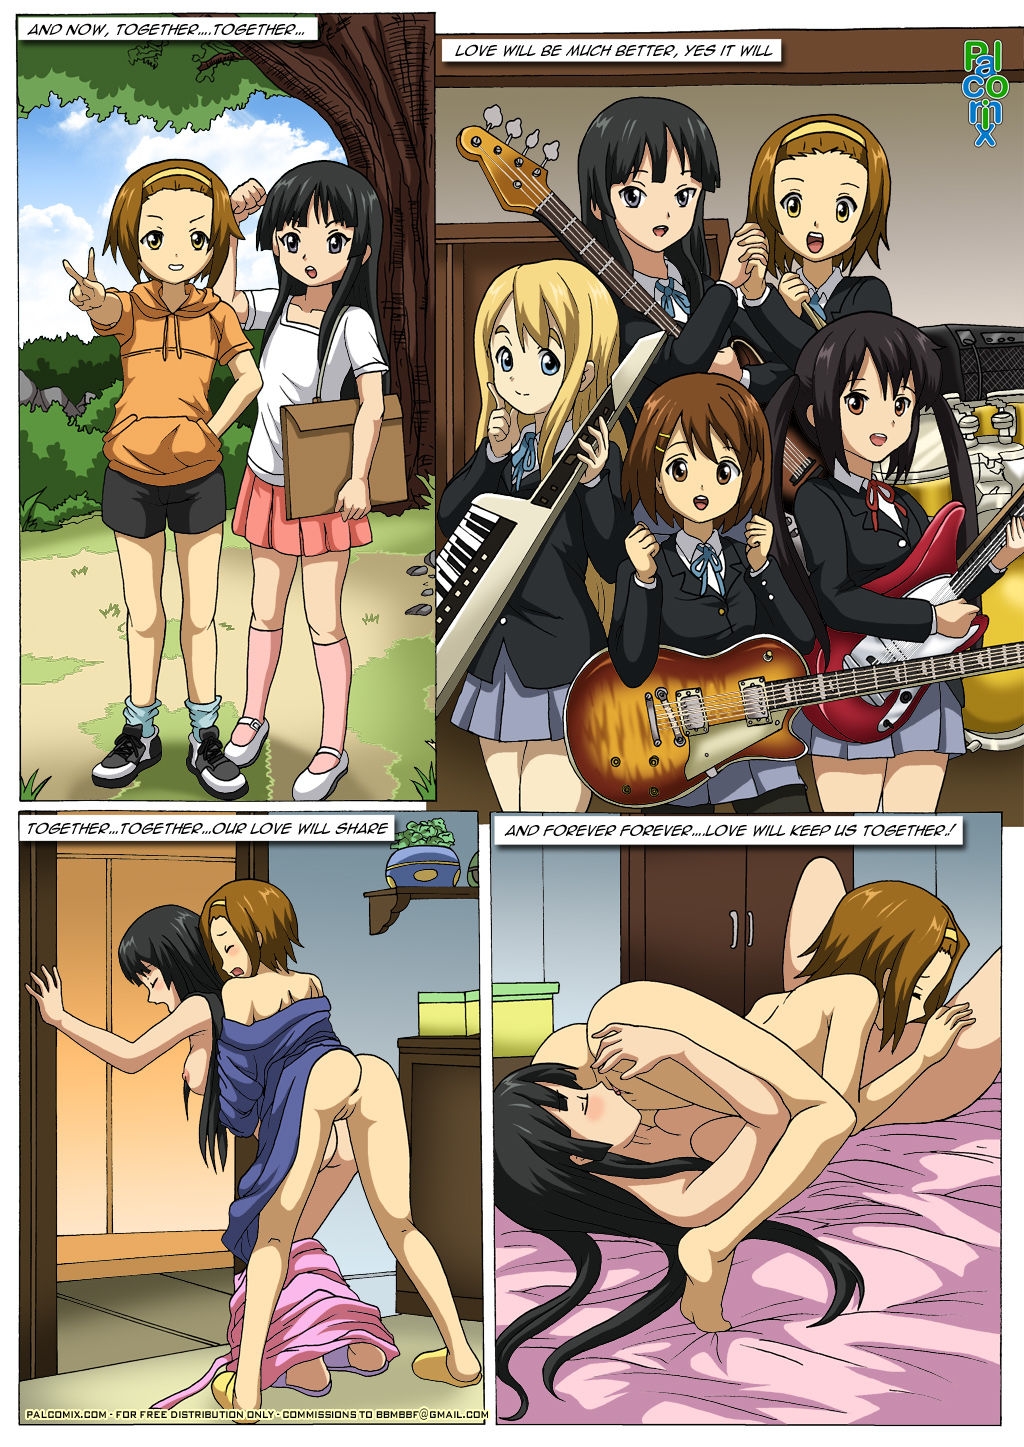 (Palcomix) On This Day... (K-ON!) 8